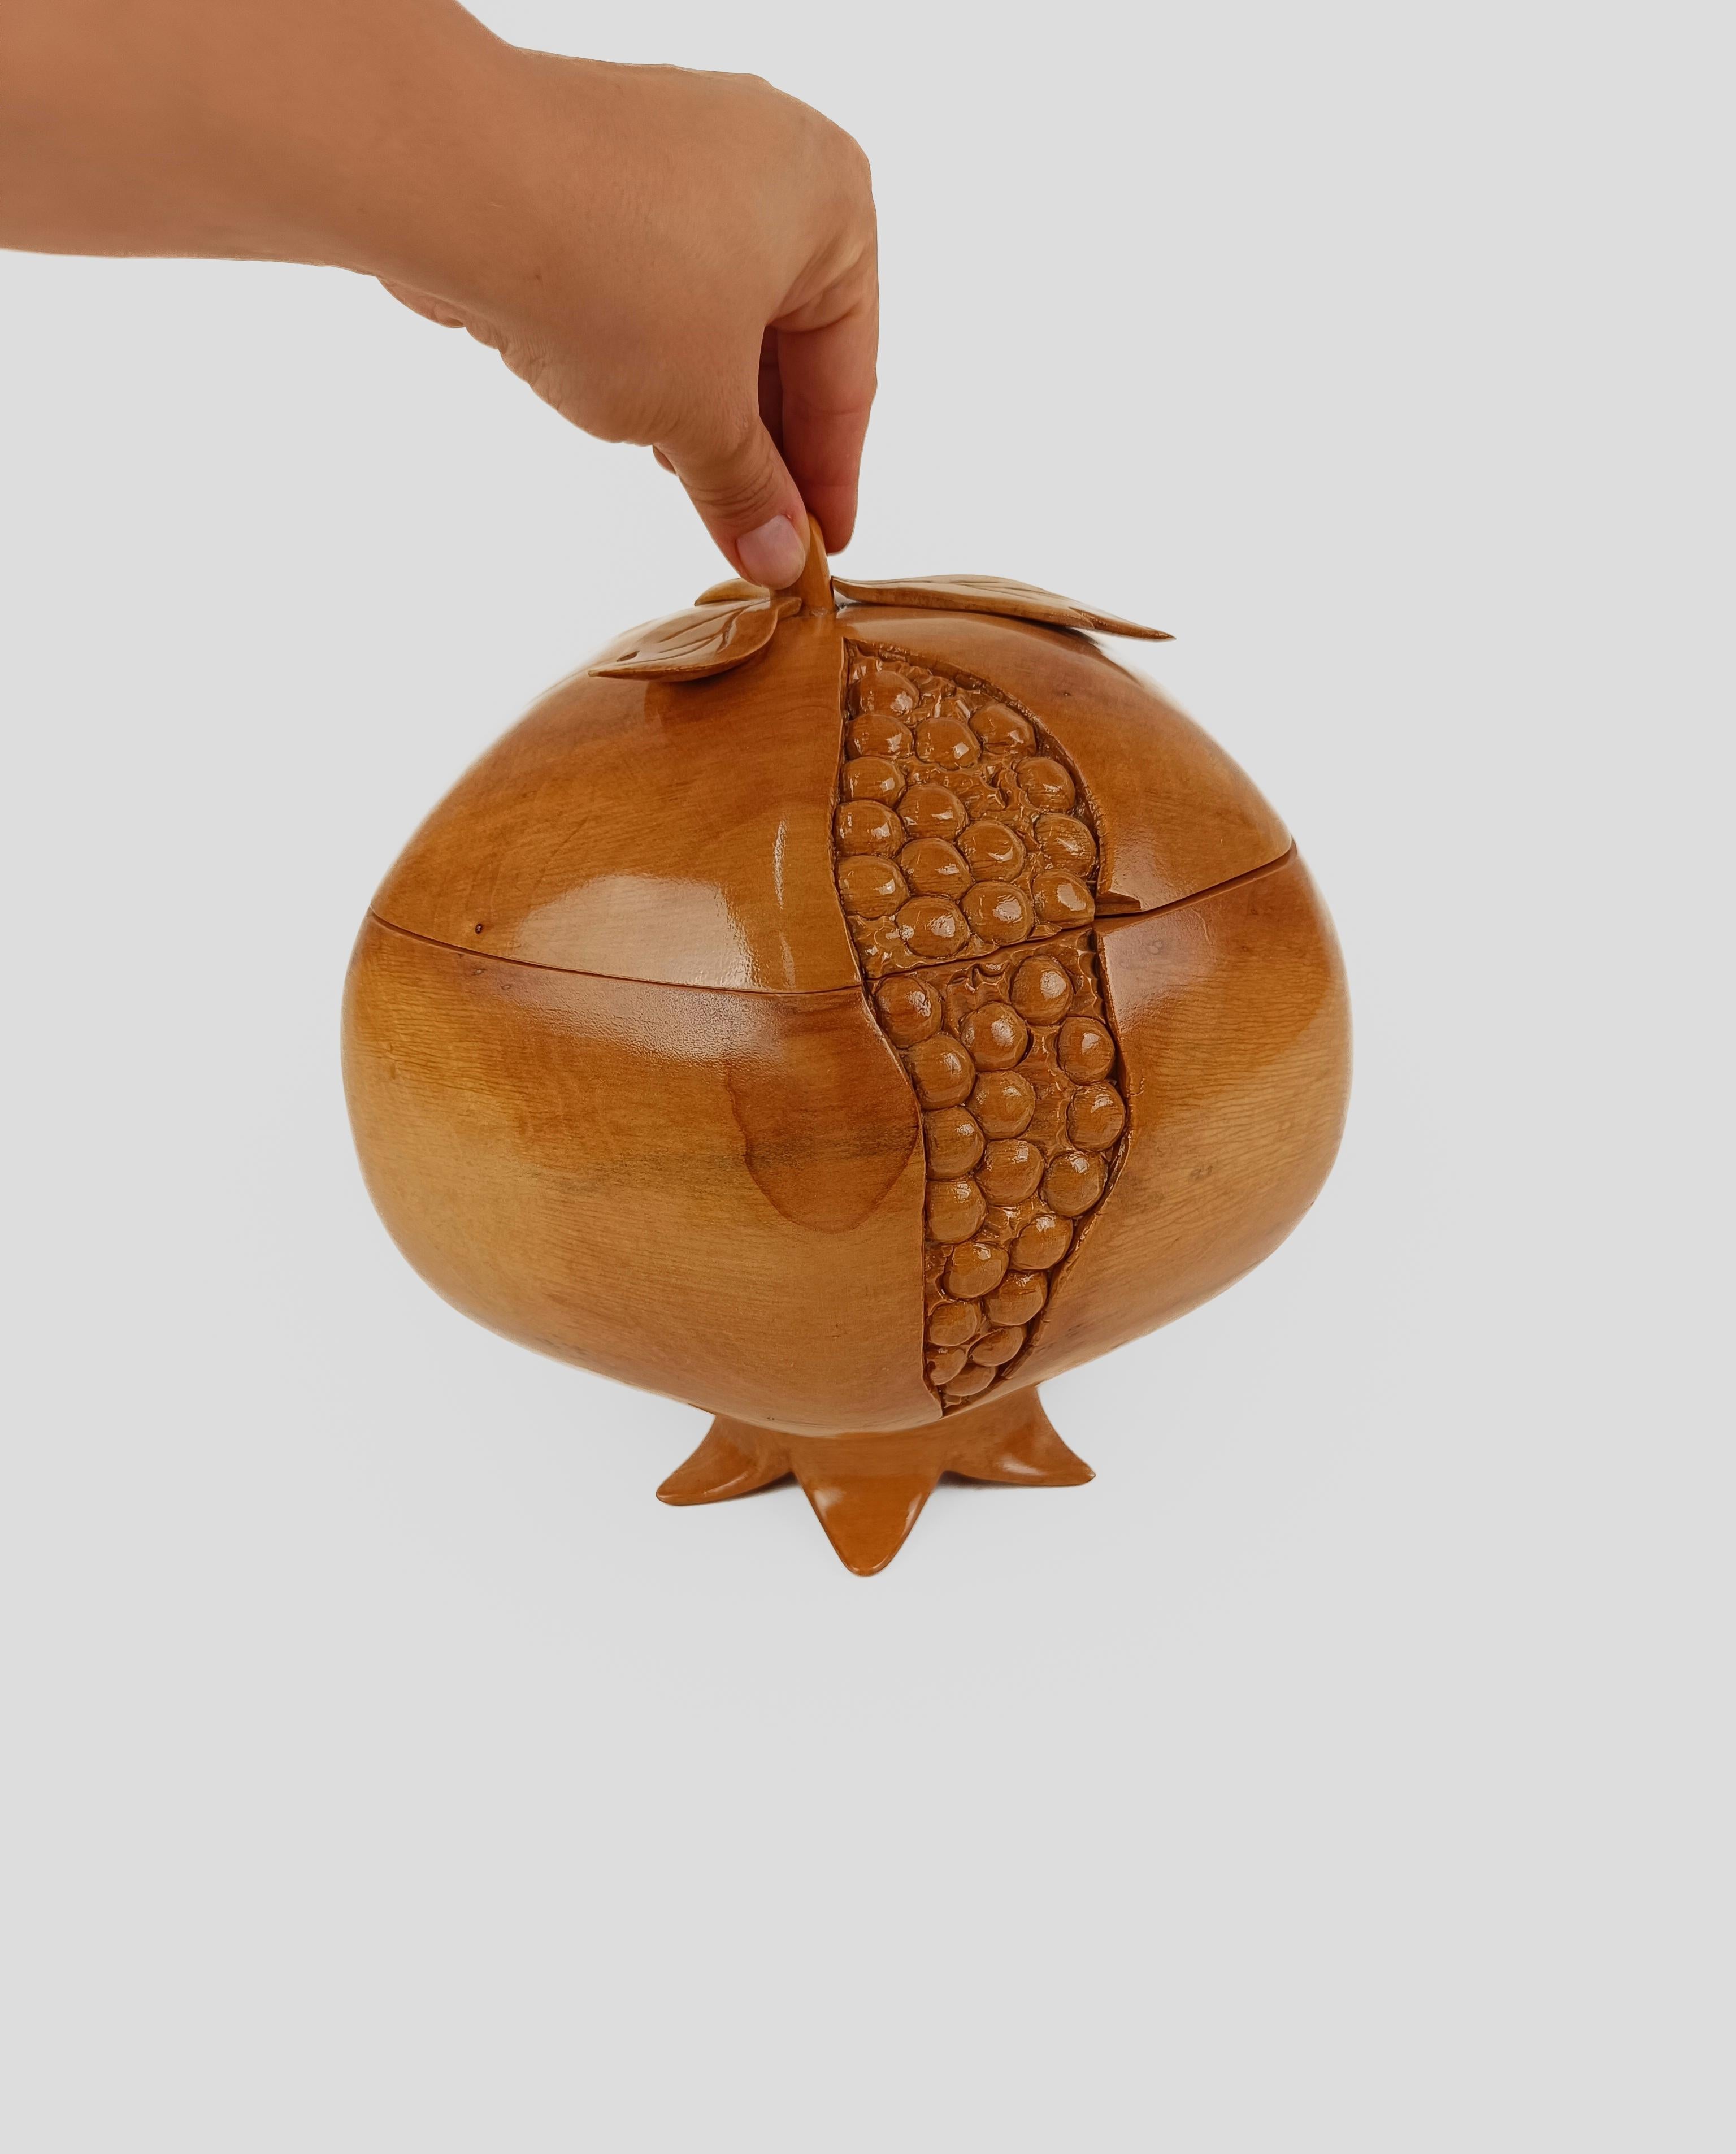 Sculptural Vintage Ice Bucket in maple wood carved in the shape of a pomegranate 8